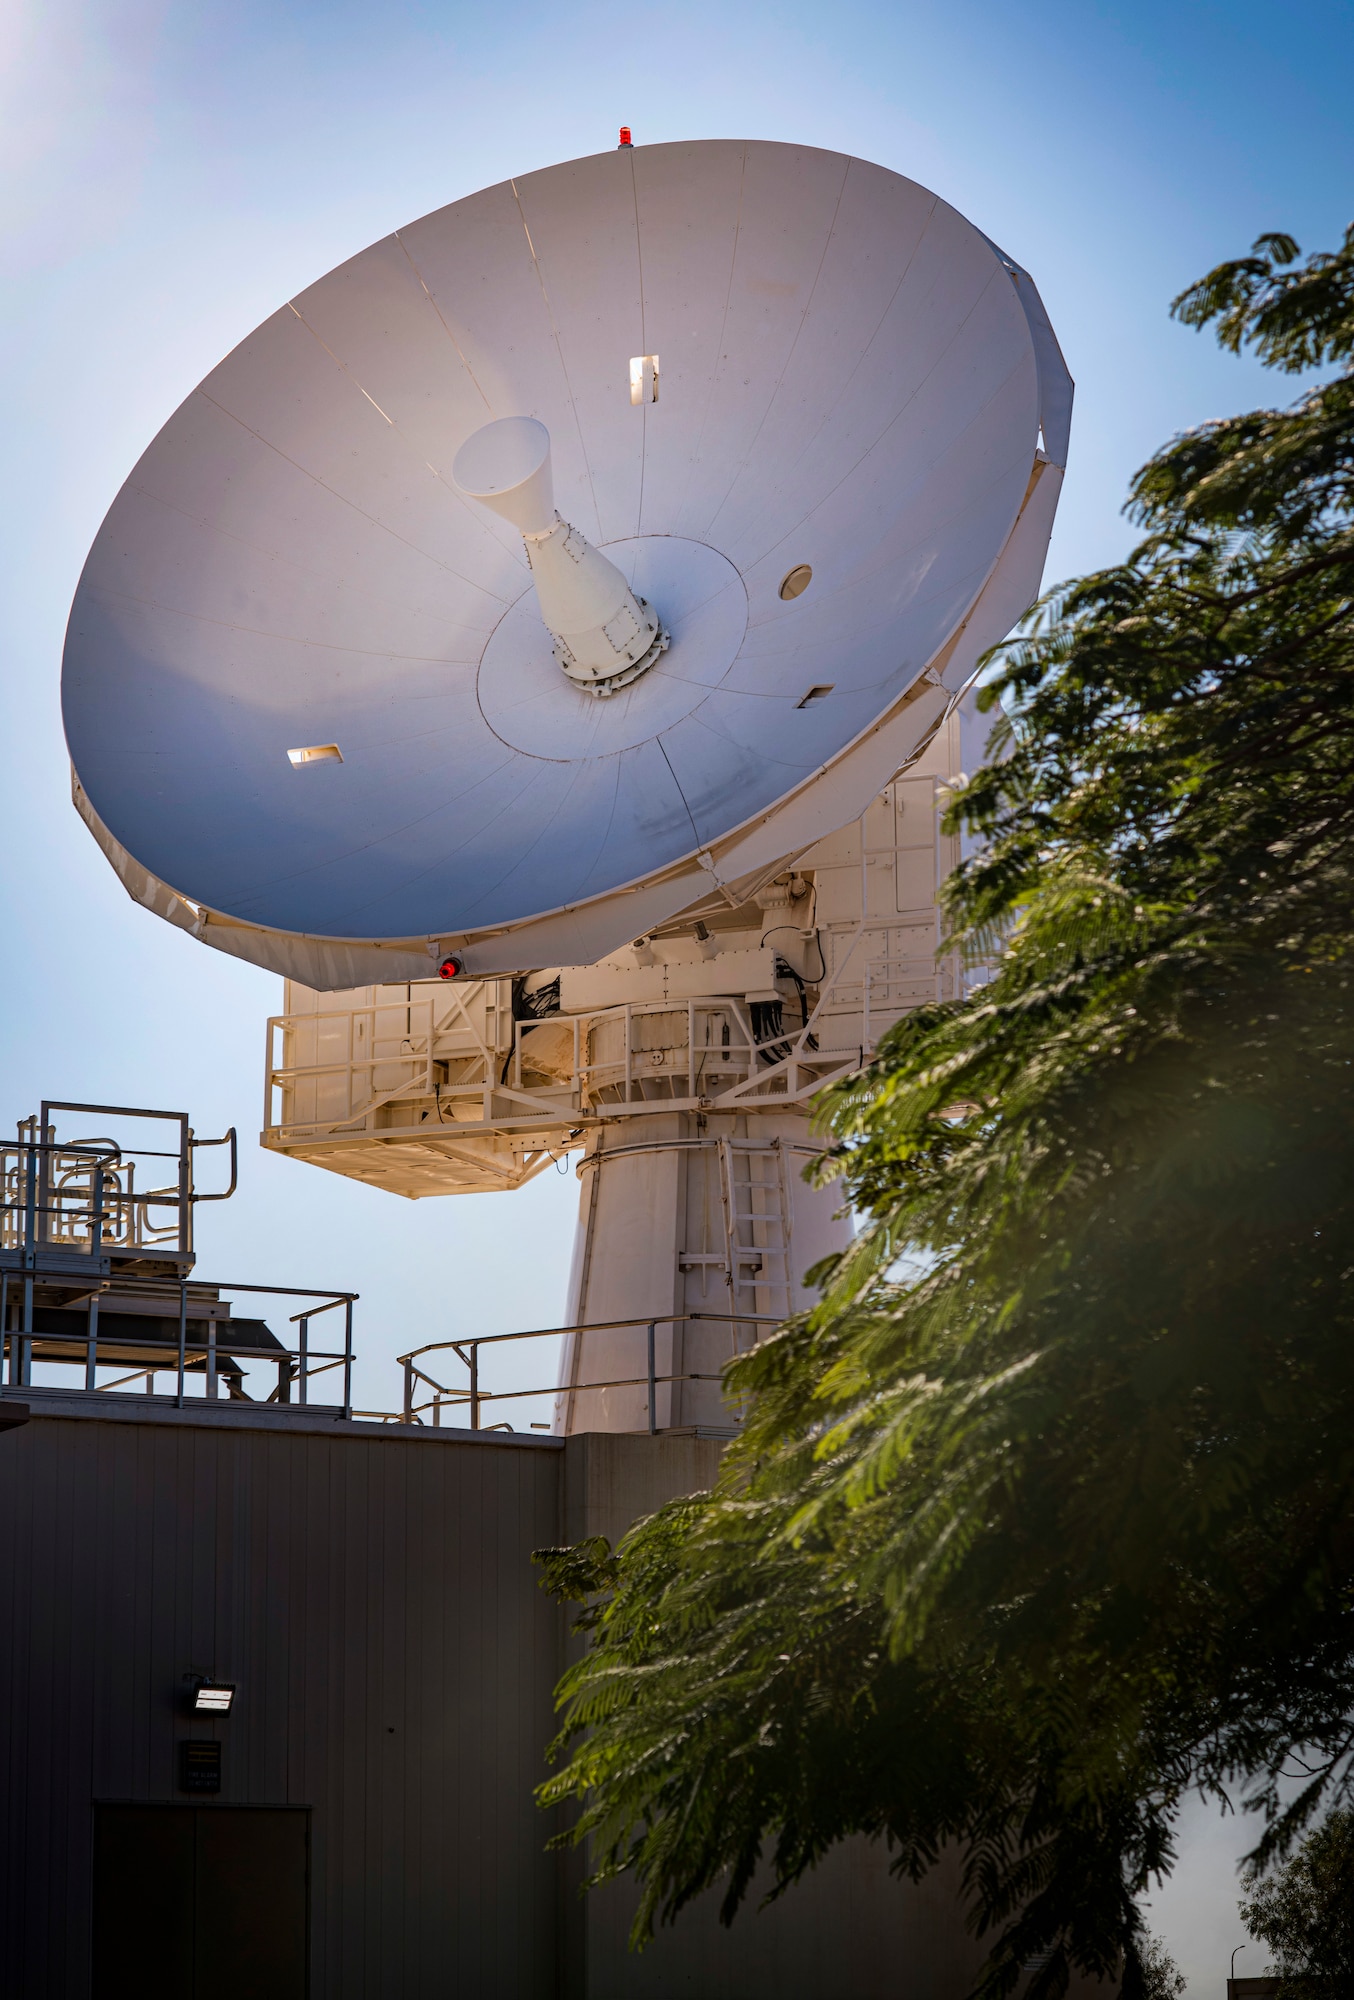 A C-Band space surveillance radar system, owned by the U.S. Air Force, operates as a dedicated sensor node at NCS Harold E. Holt, near Exmouth, Australia. Strategically located to cover both the southern and eastern hemisphere, the C-Band radar provides tracking and identification of space assets and debris for the U.S. space surveillance network. (U.S. Navy photo by Mass Communication Specialist 2nd Class Jeanette Mullinax)